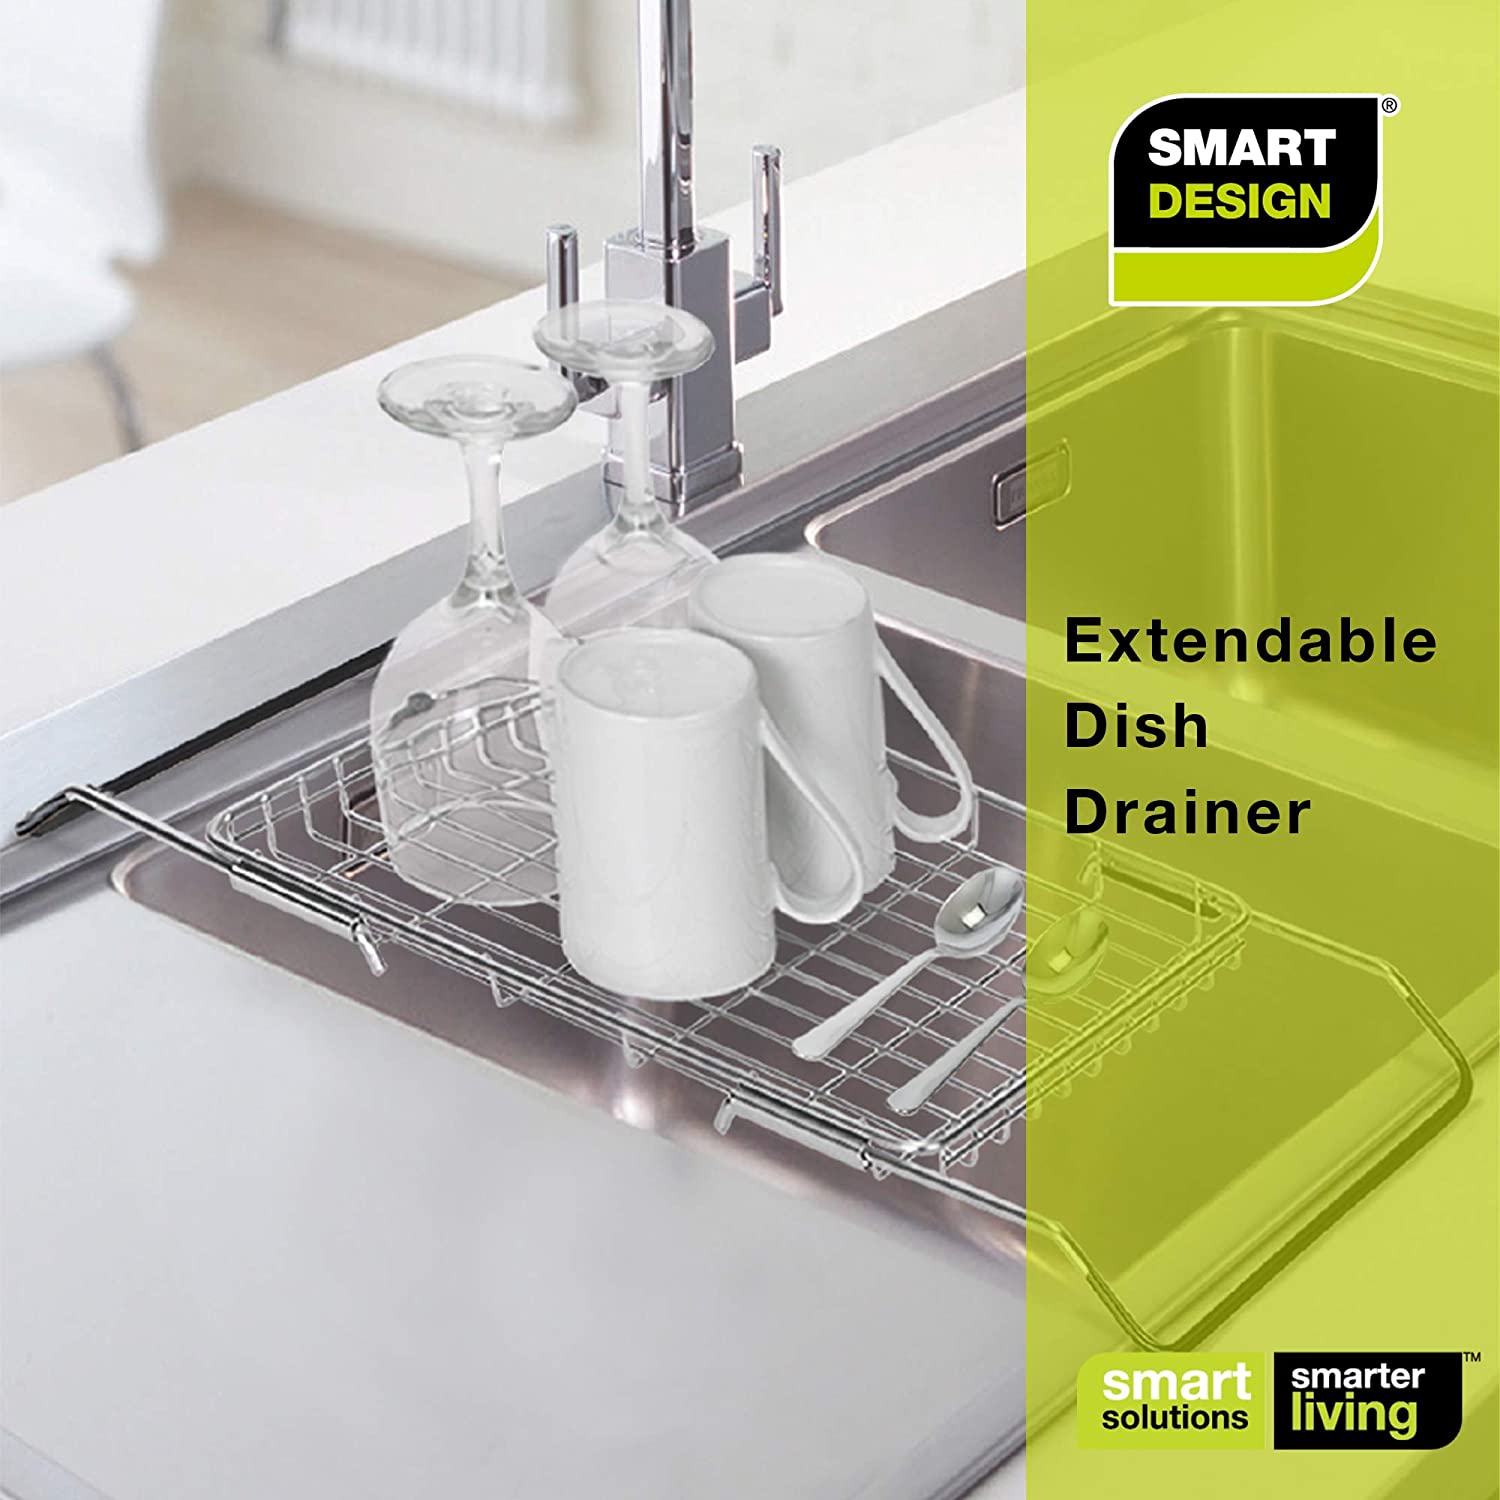 Expandable Dish Drainer with Adjustable Arms - Smart Design® 6